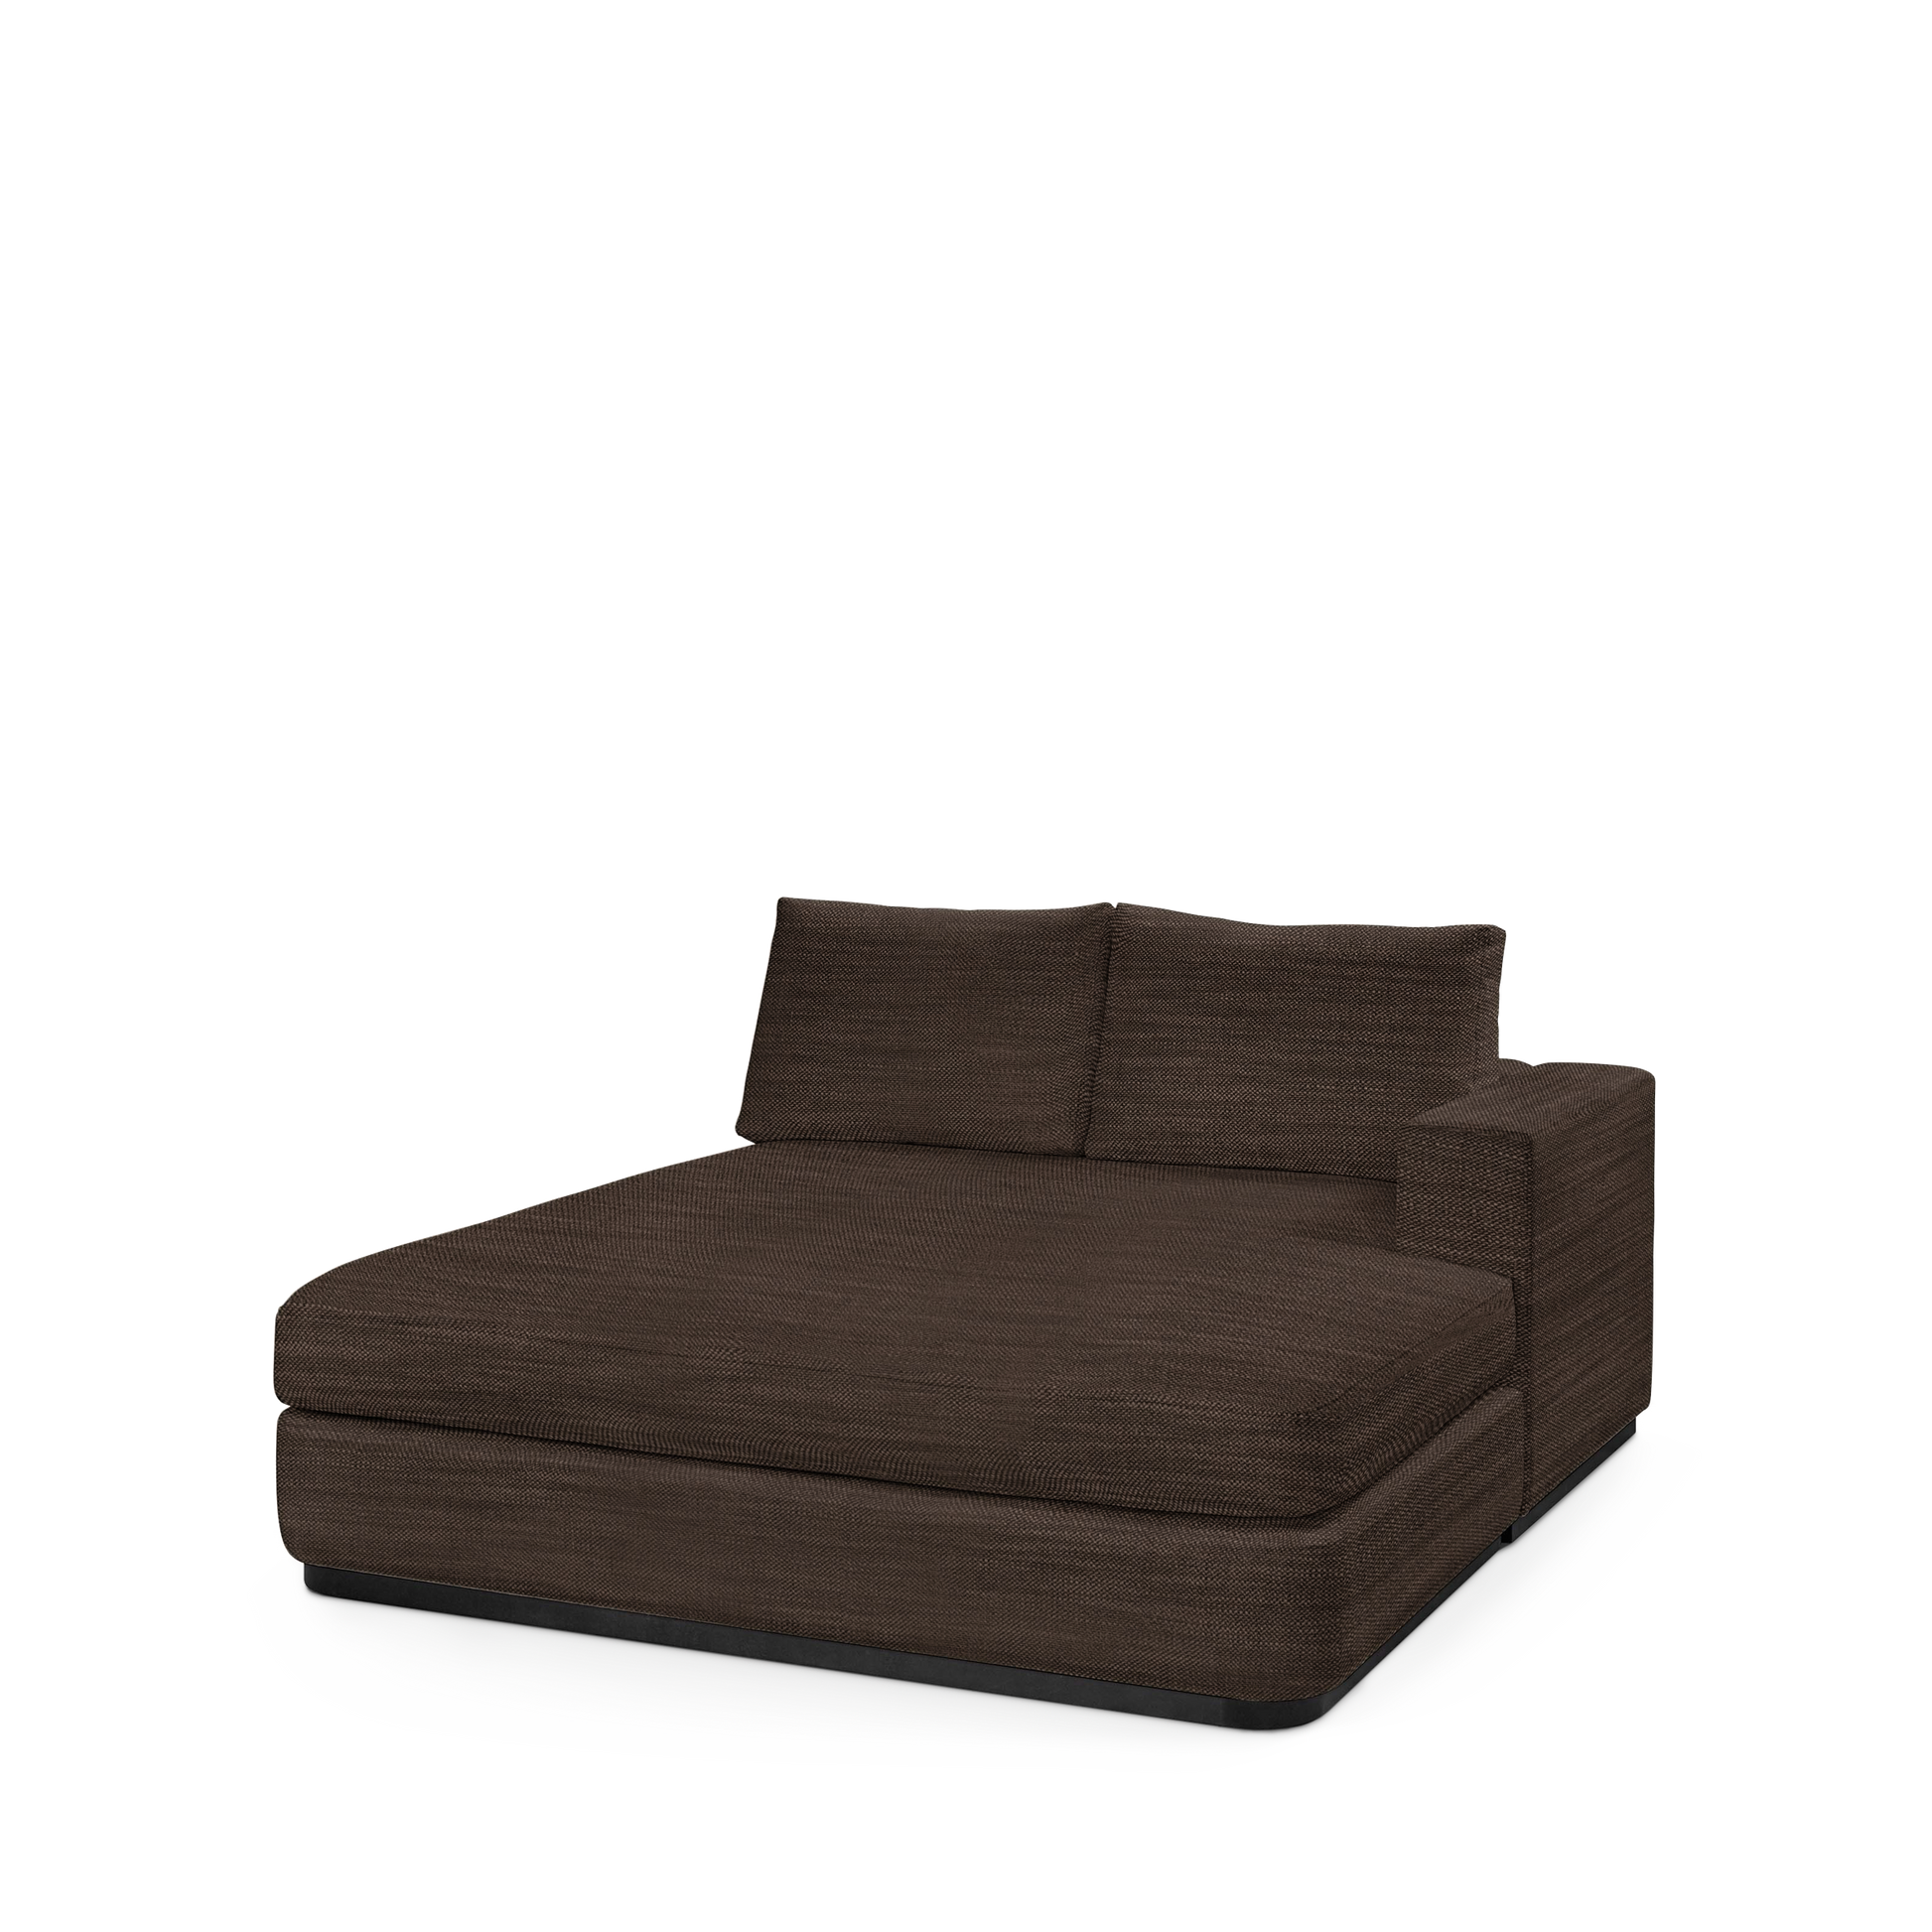 ATLAS 160 Lounge Bed arm rest right with Rocco brown textile